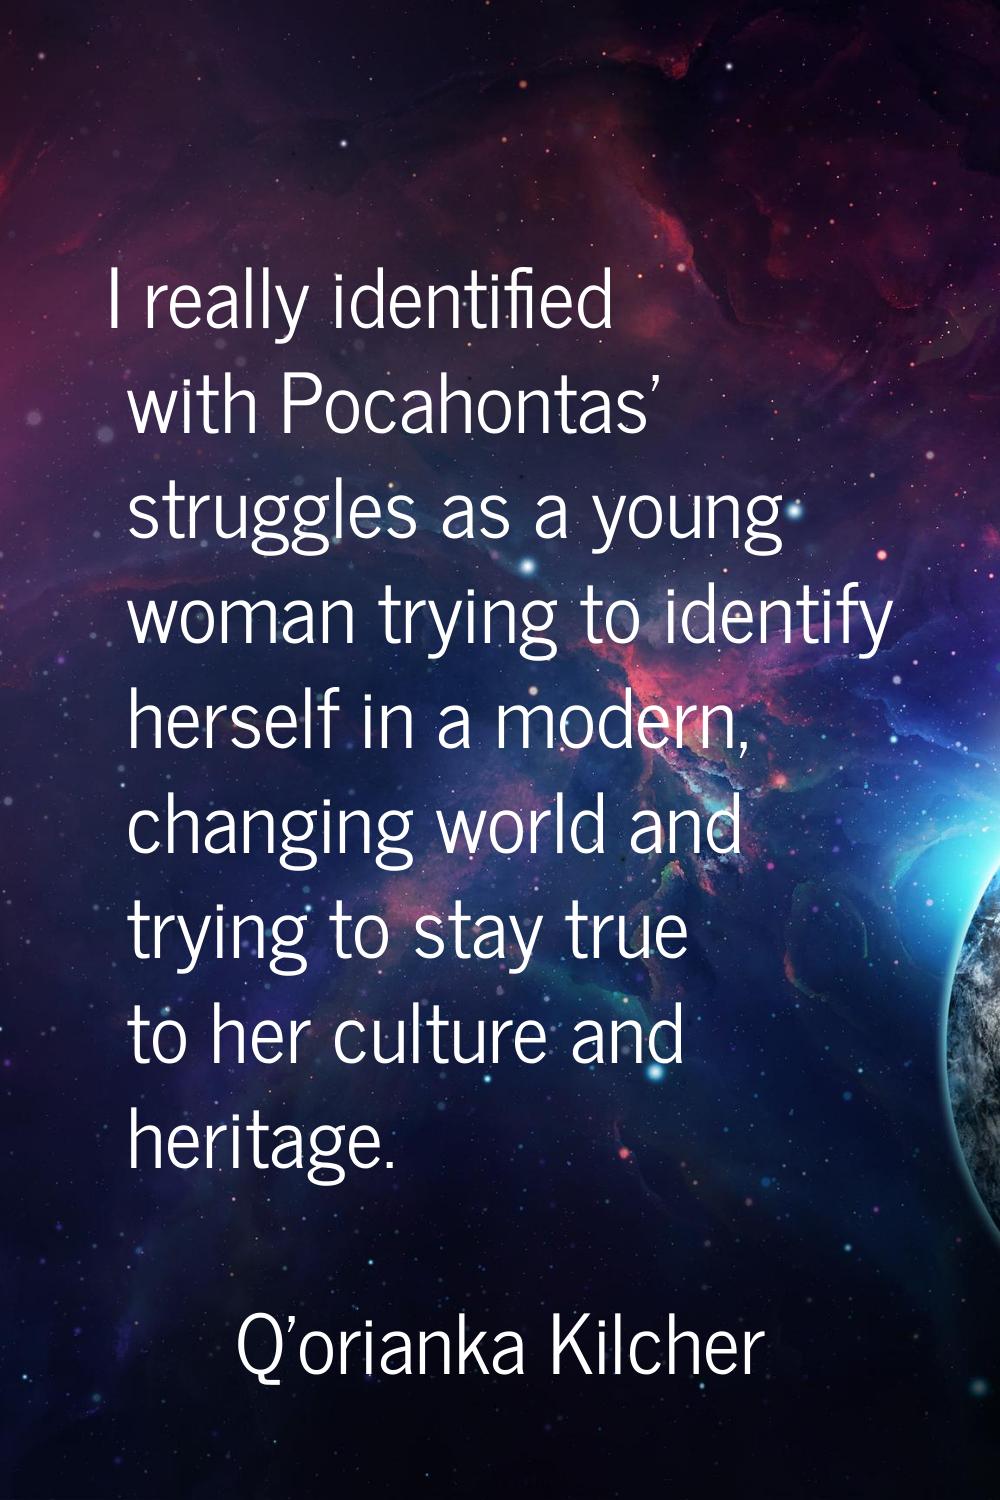 I really identified with Pocahontas' struggles as a young woman trying to identify herself in a mod